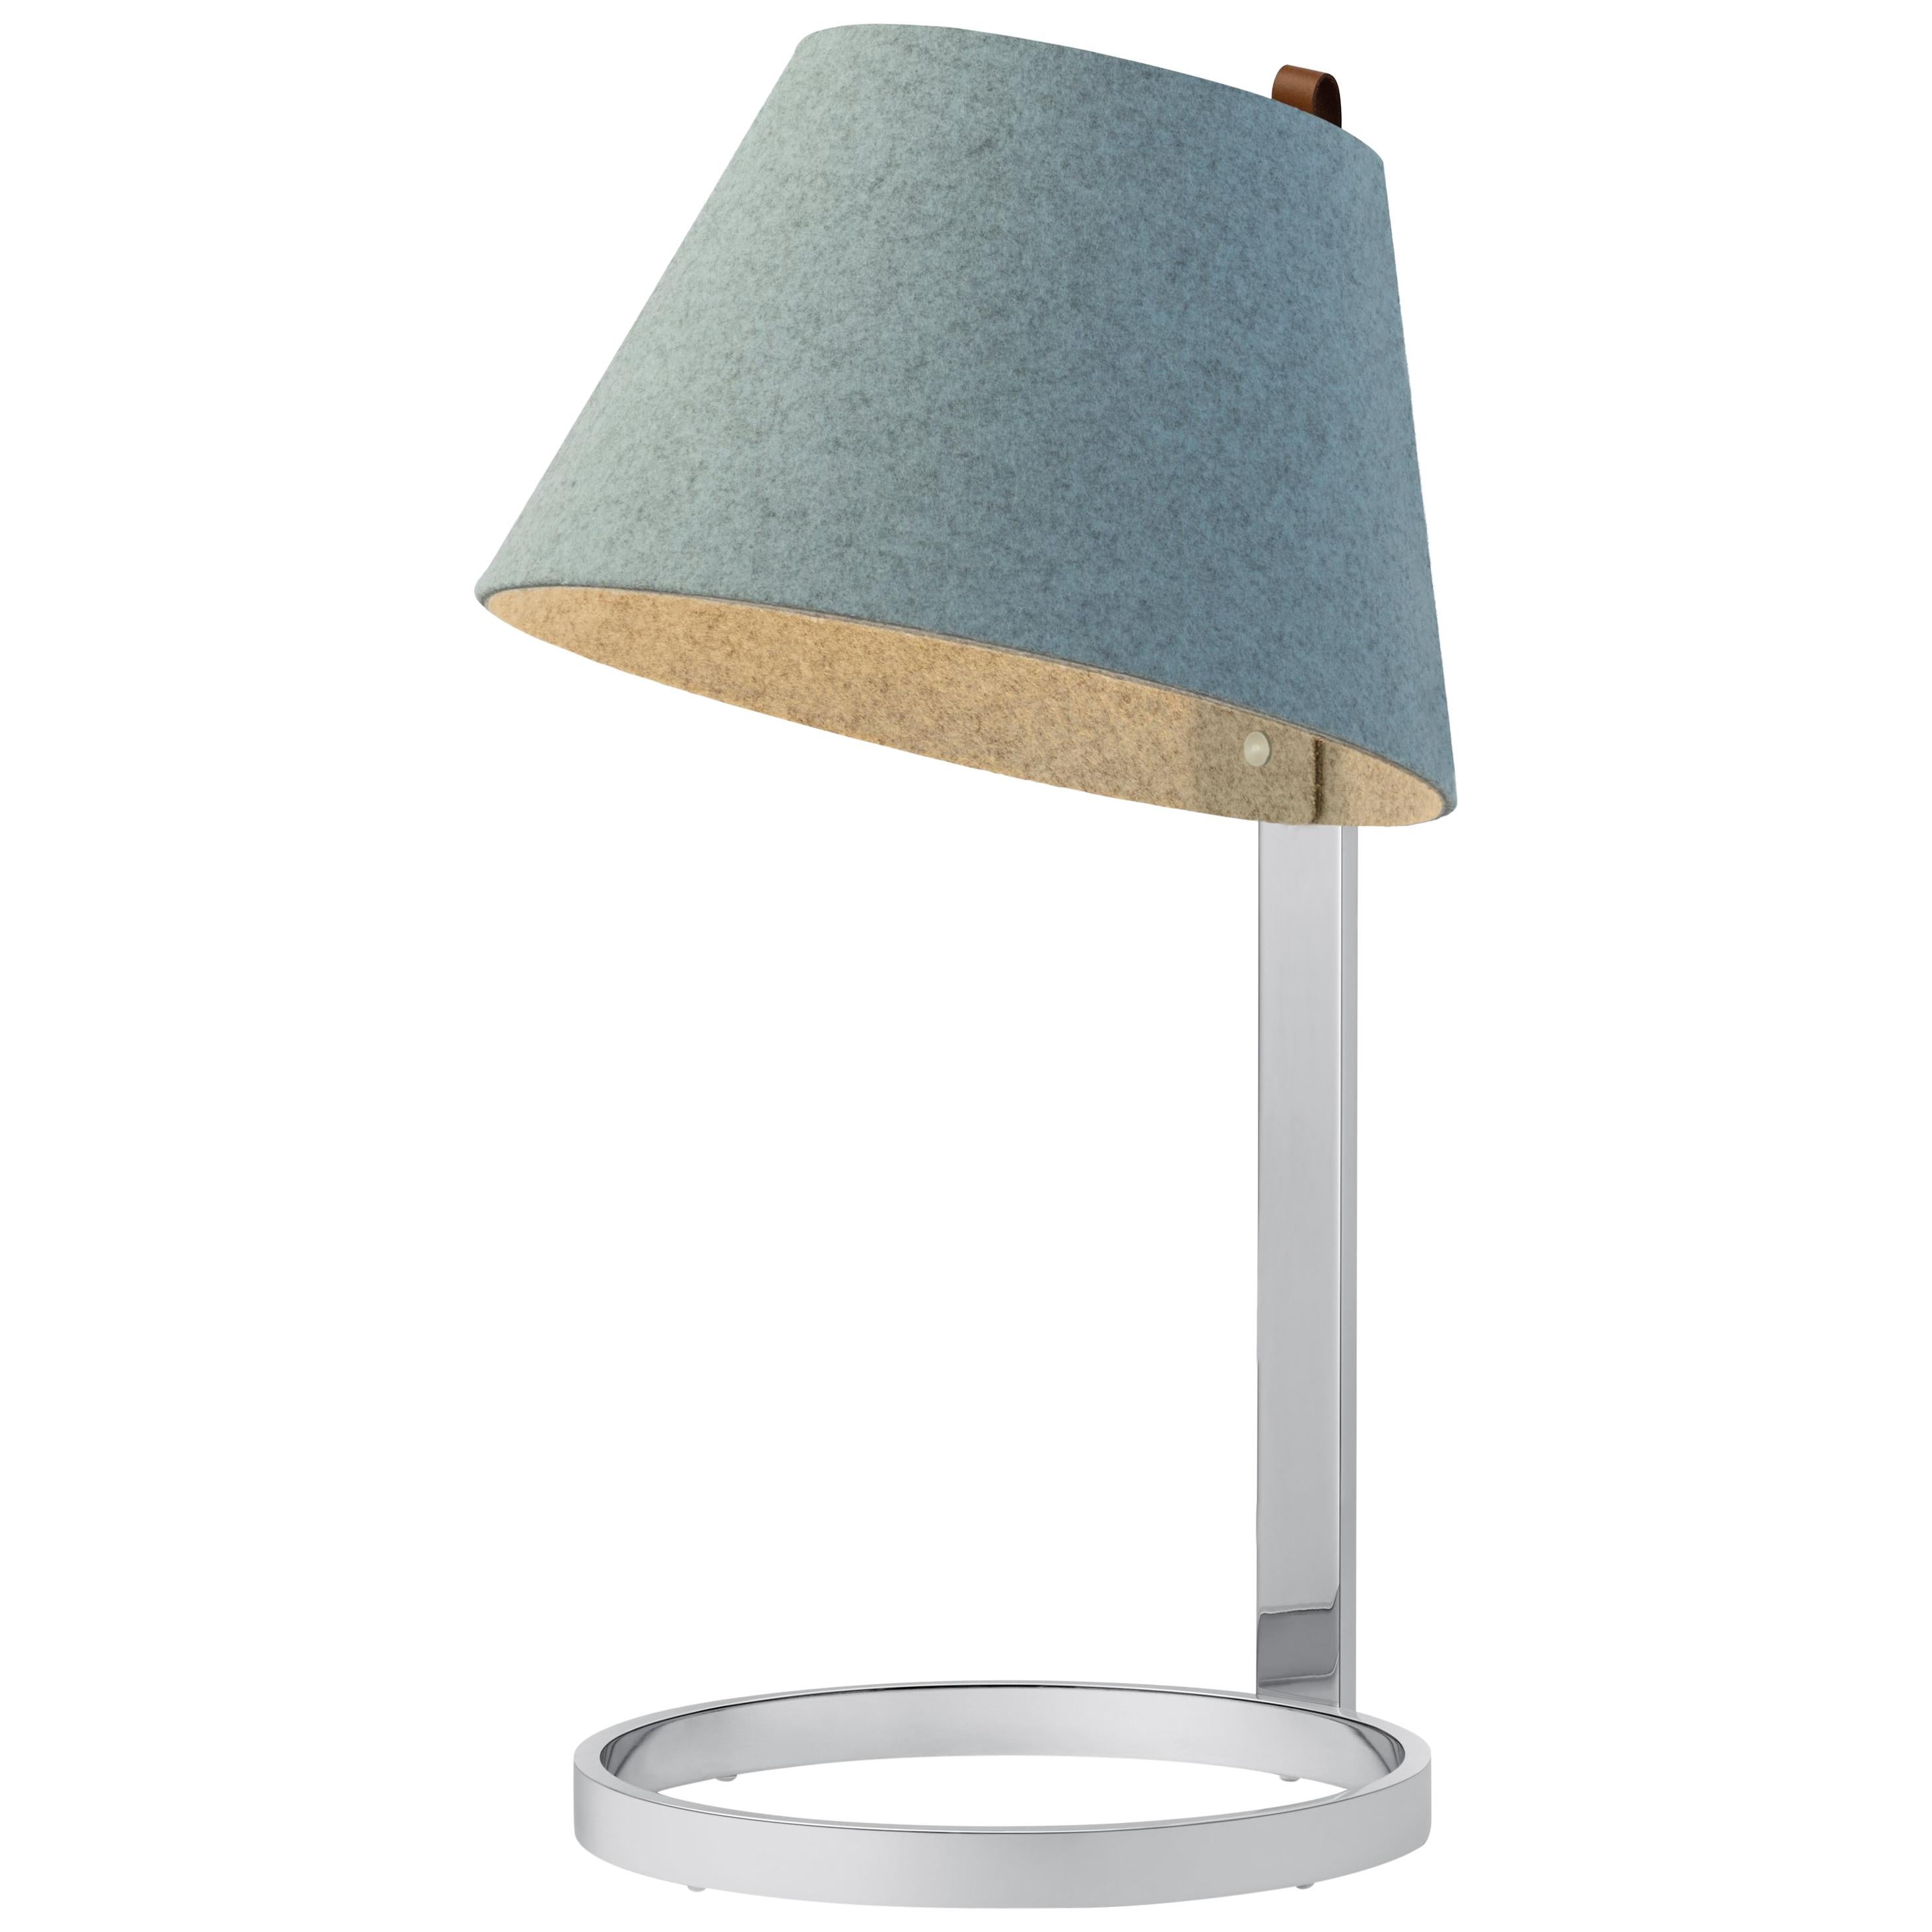 Lana Small Table Lamp in Arctic Blue and Grey with Chrome Base by Pablo Designs